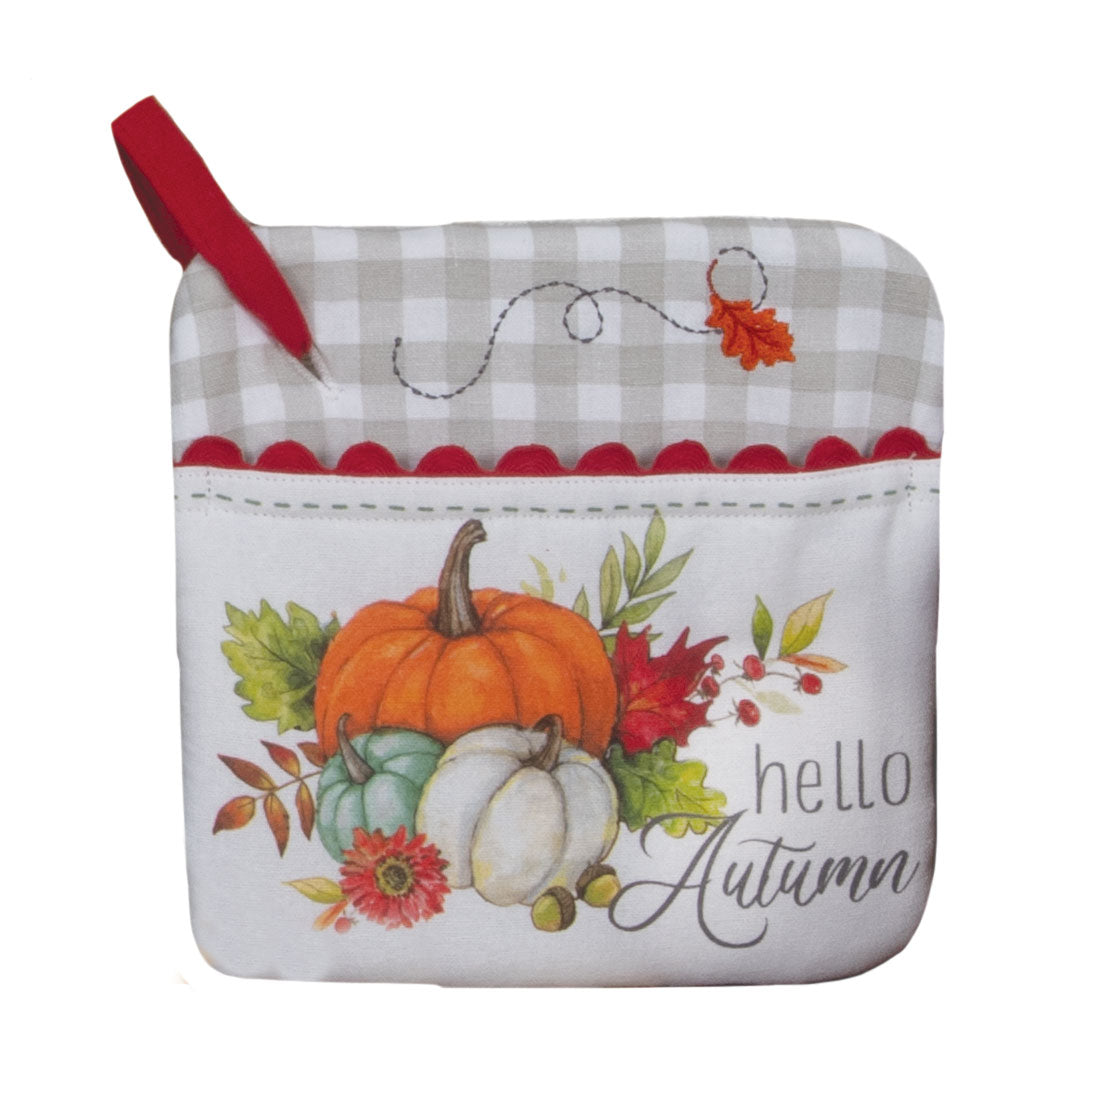 padded potholder mitt with a picture of pumpkins and leaves, says Hello Autumn